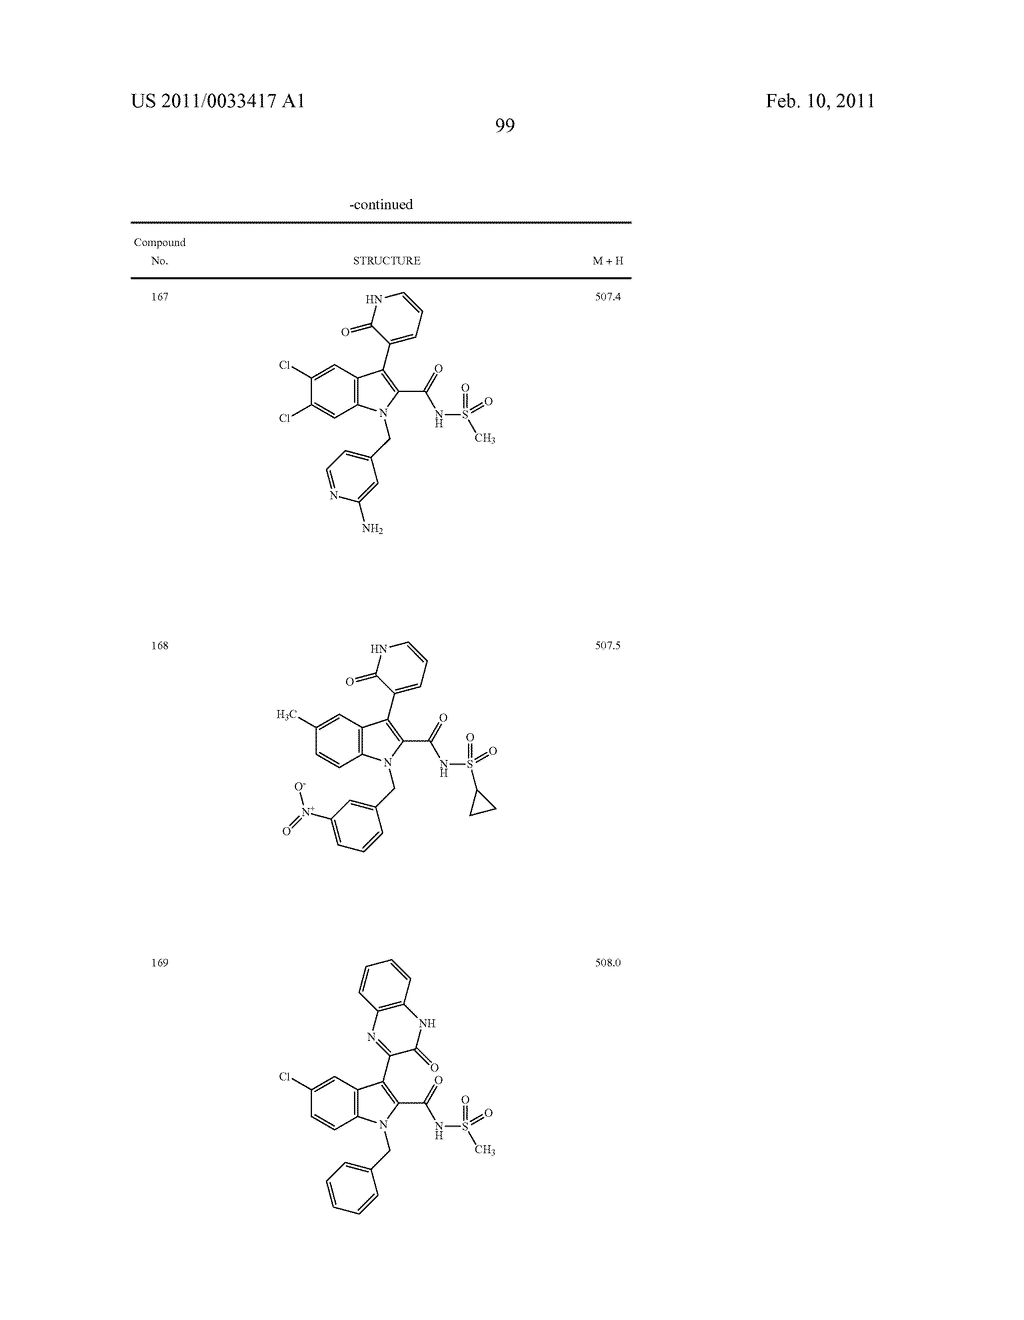 2,3-SUBSTITUTED INDOLE DERIVATIVES FOR TREATING VIRAL INFECTIONS - diagram, schematic, and image 100